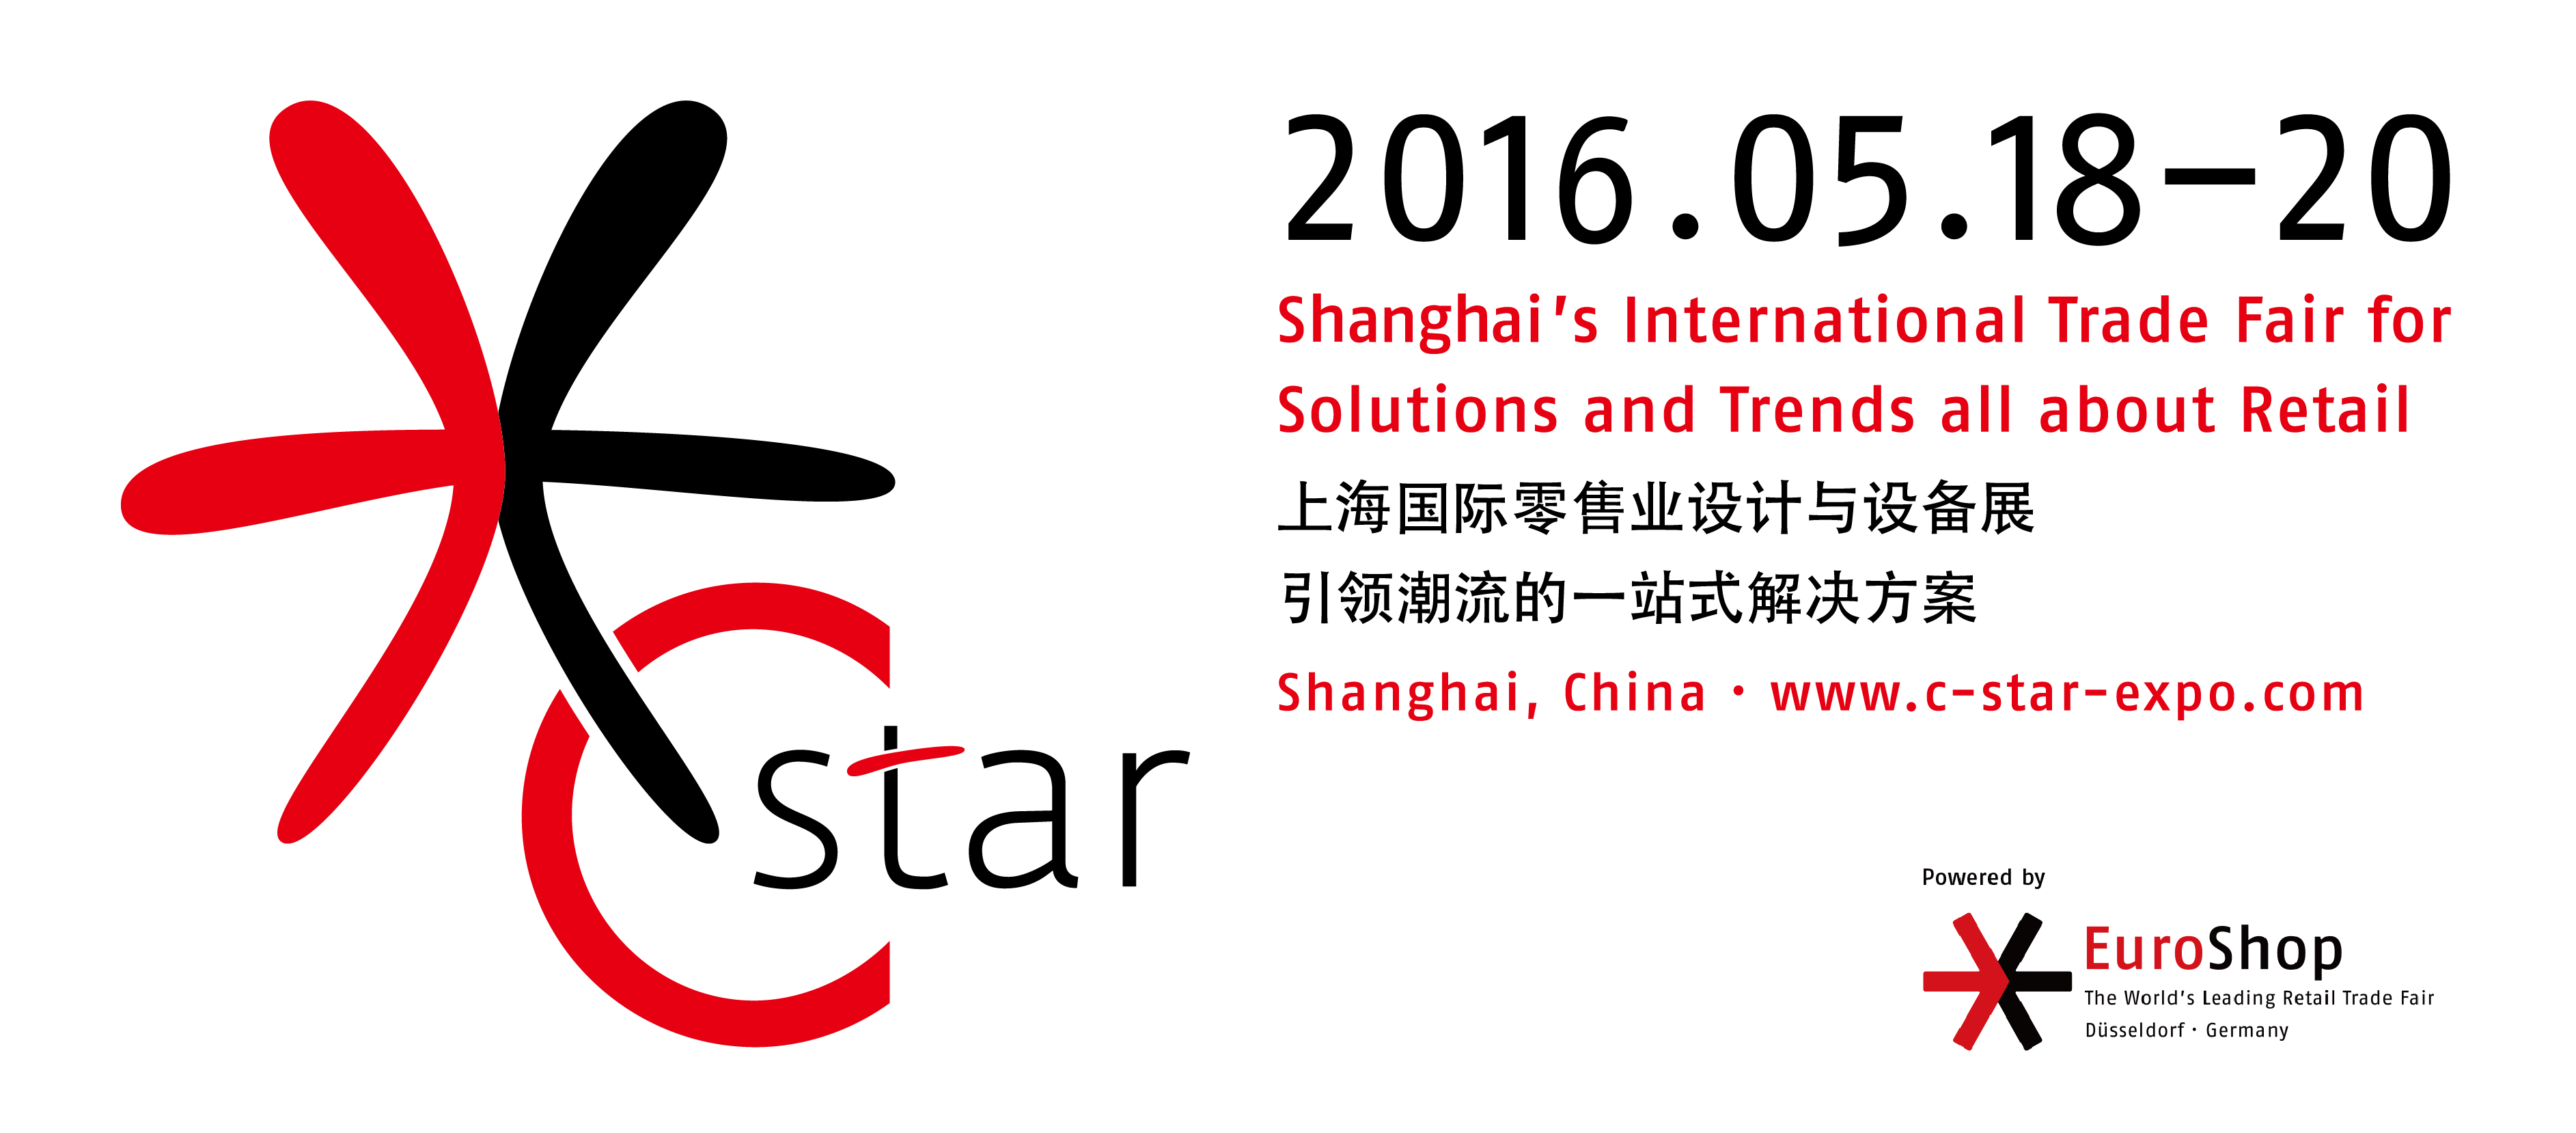 C-star: China’s Most International Retail Trade Fair is on the Path towards Solid Expansion 